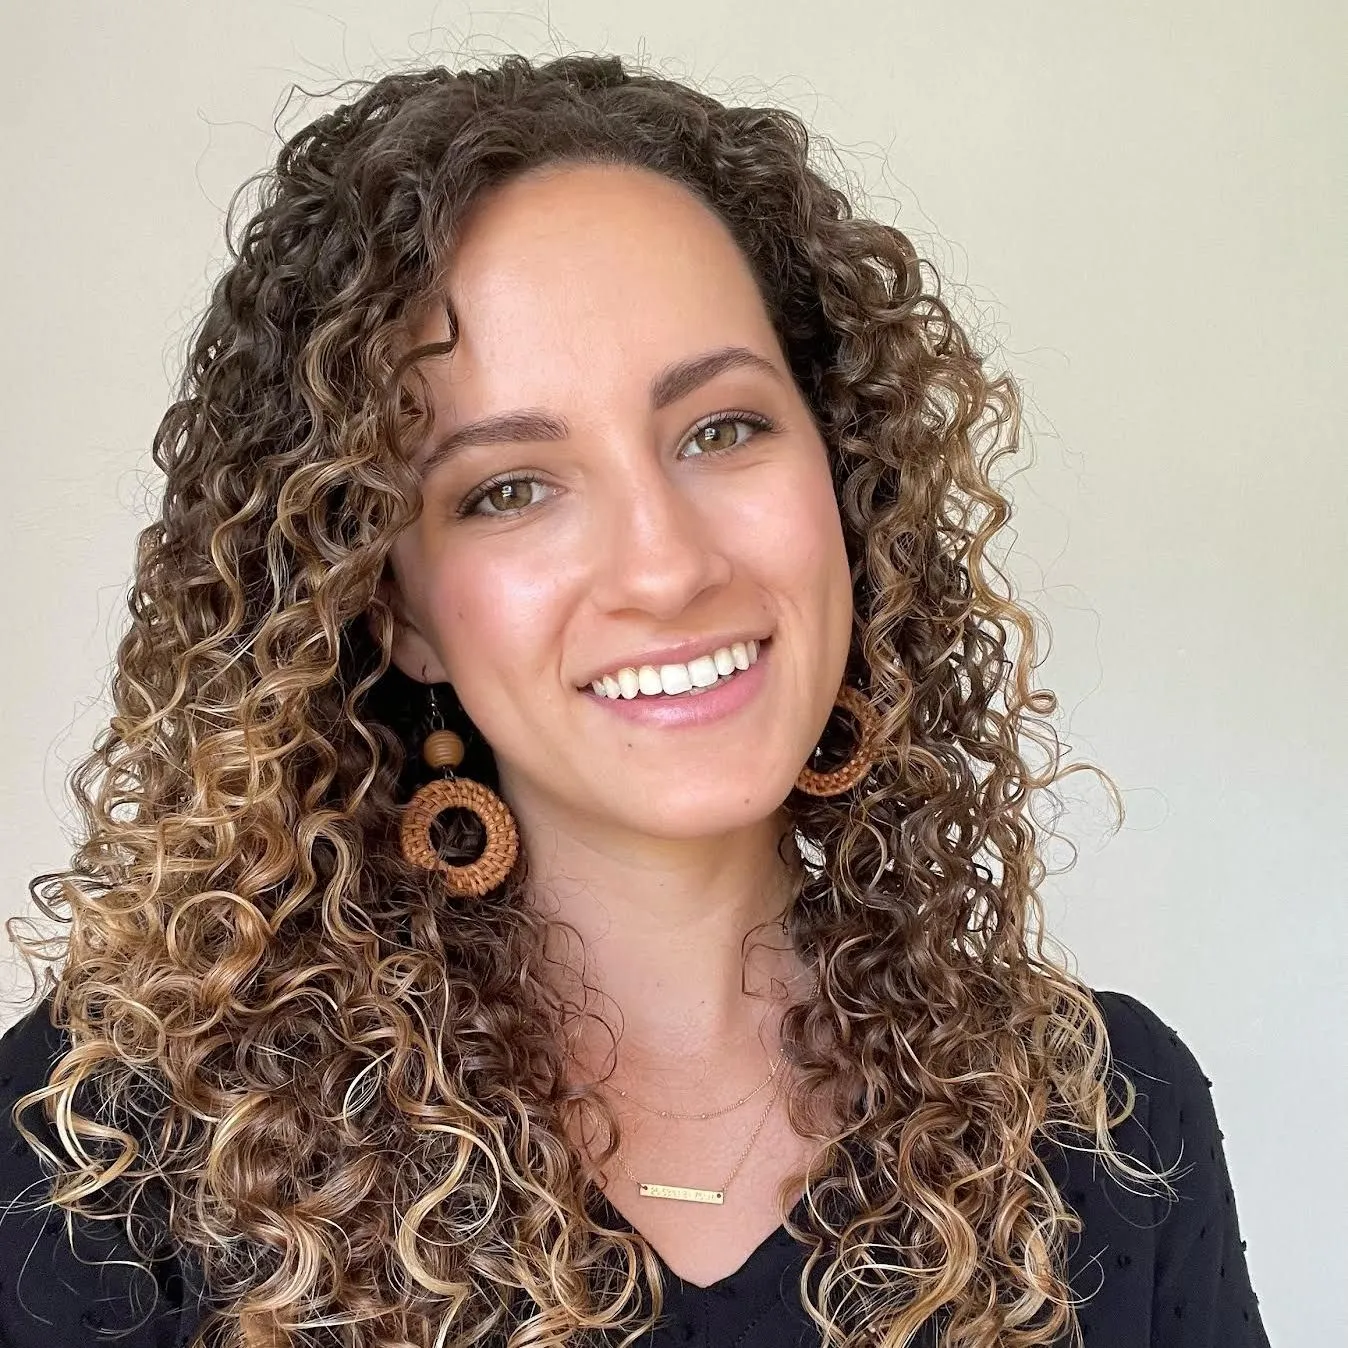 A woman with curly hair and earrings is smiling for the camera.